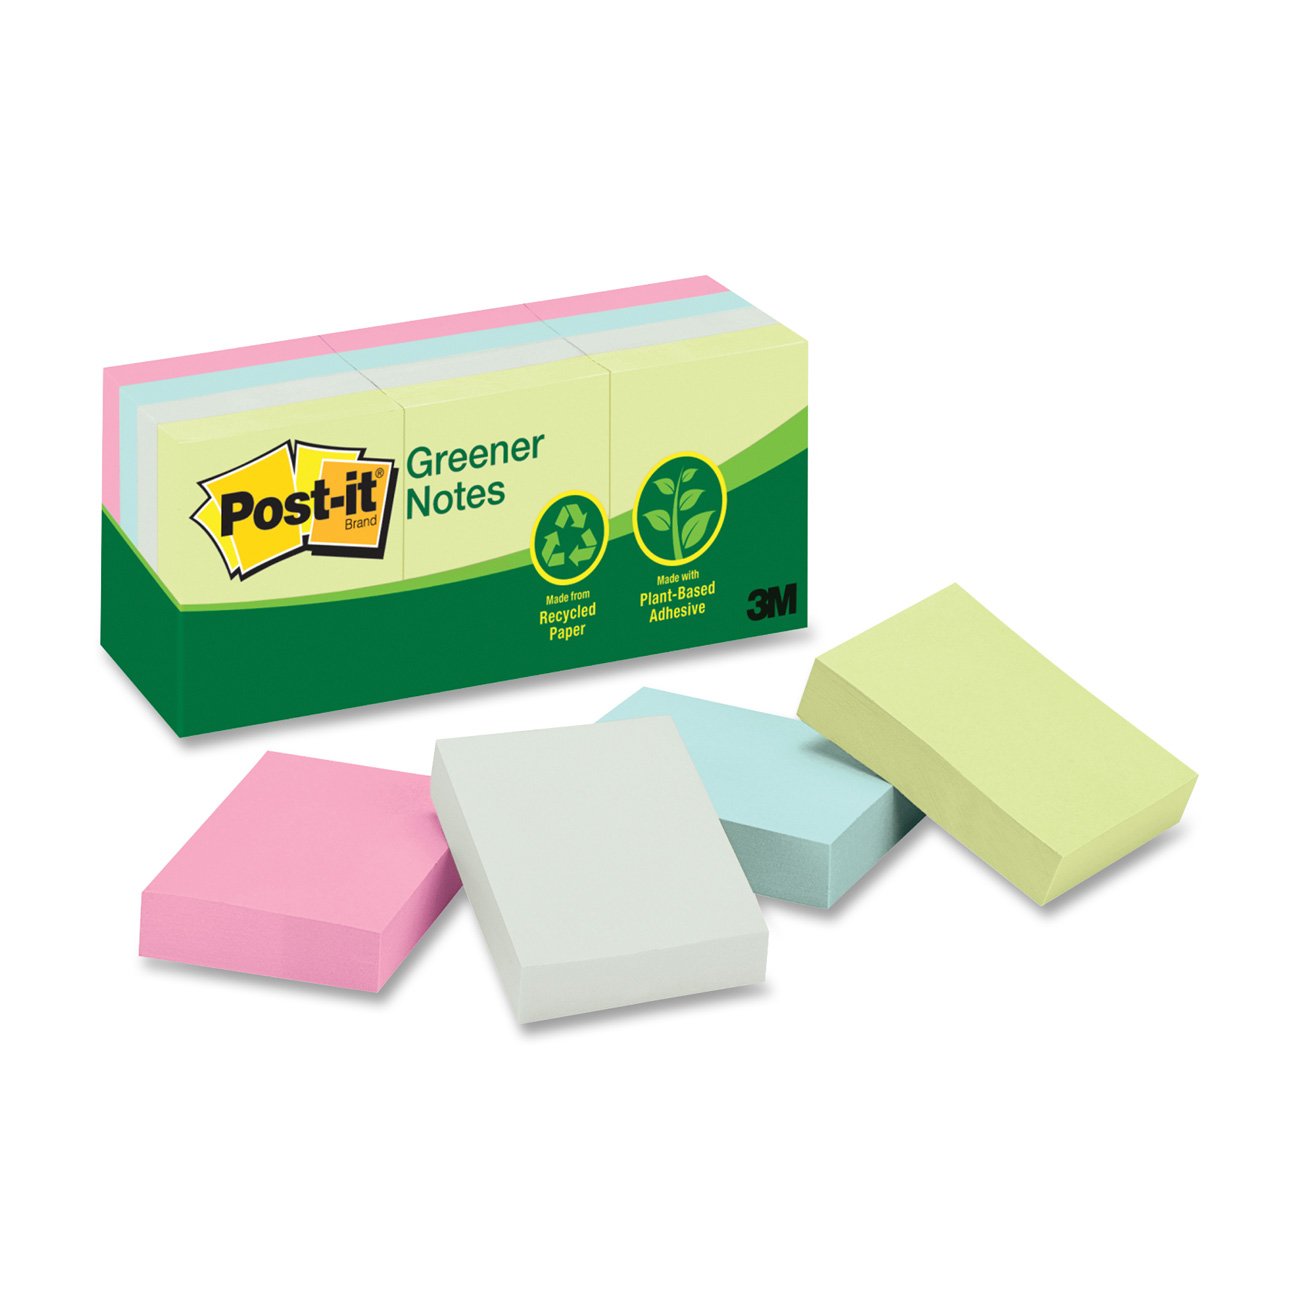 Post-it Notes, Original Pad, 1 3/8 Inches x 1 7/8 Inches, Recycled ...